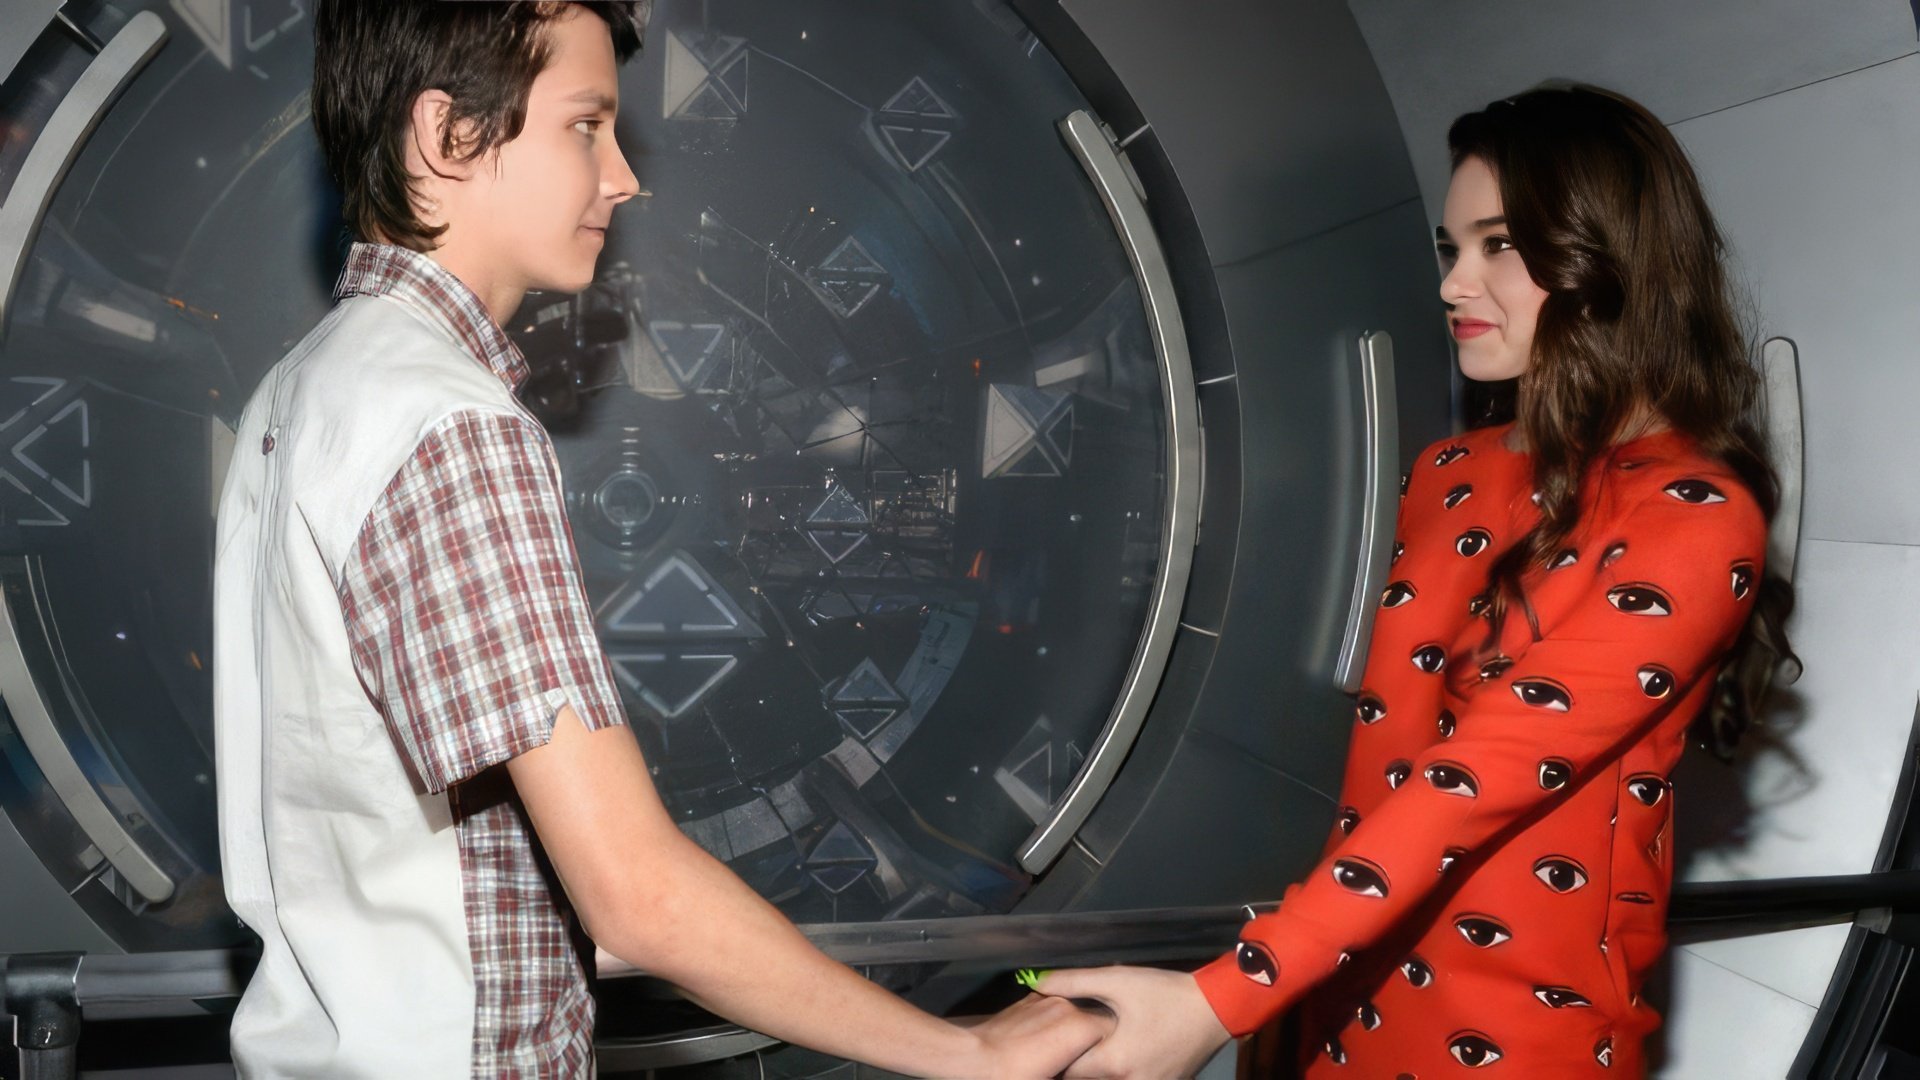 Asa Butterfield and Hailee Steinfeld on the set of Ender's Game